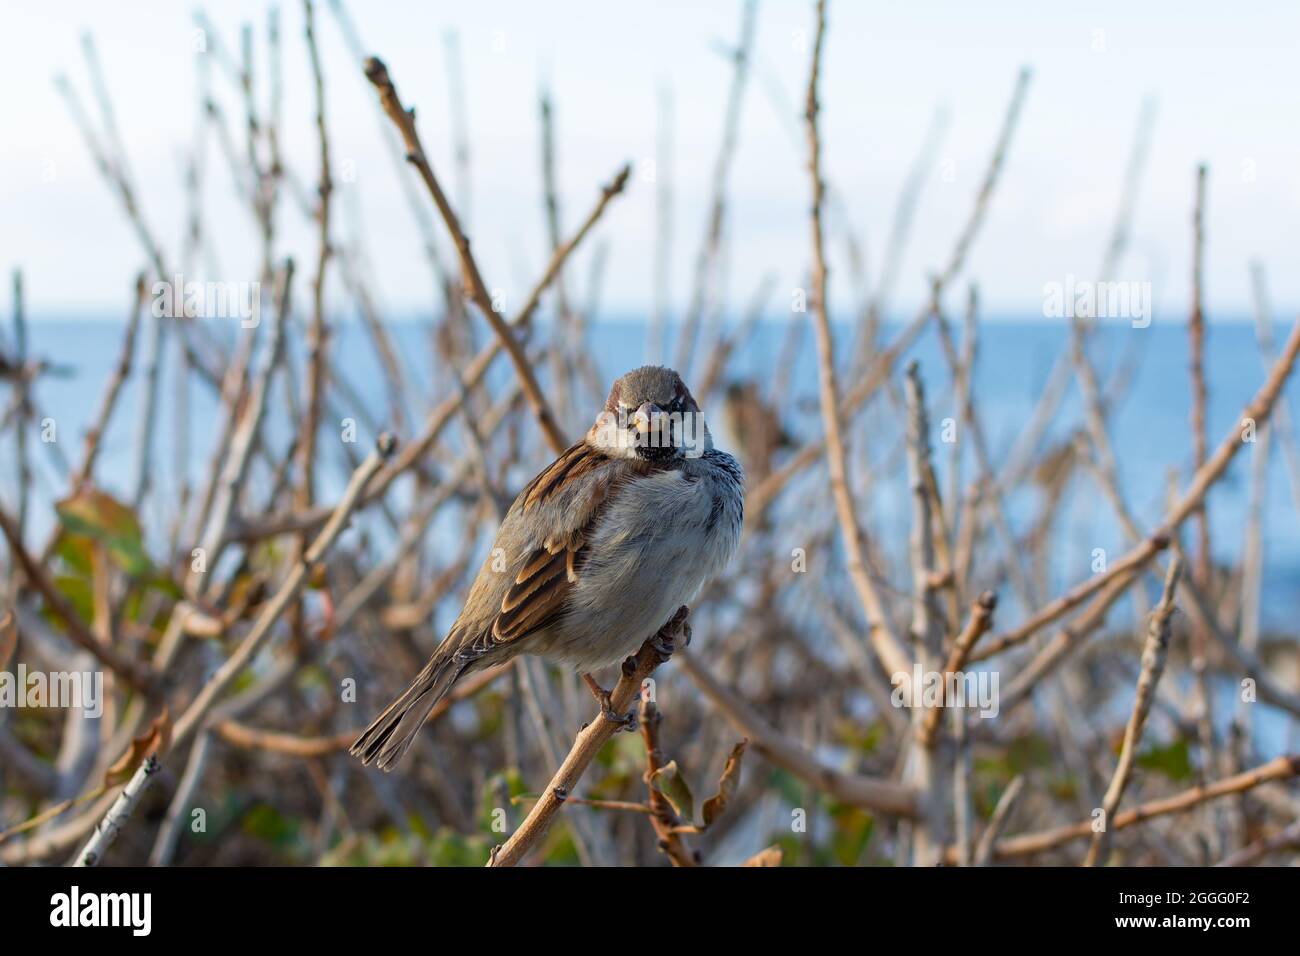 A sparrow is sitting on a branch. Portrait of a perched sparrow against the background of the blue sea and sky. Wild wildlife, urban birds are asking Stock Photo